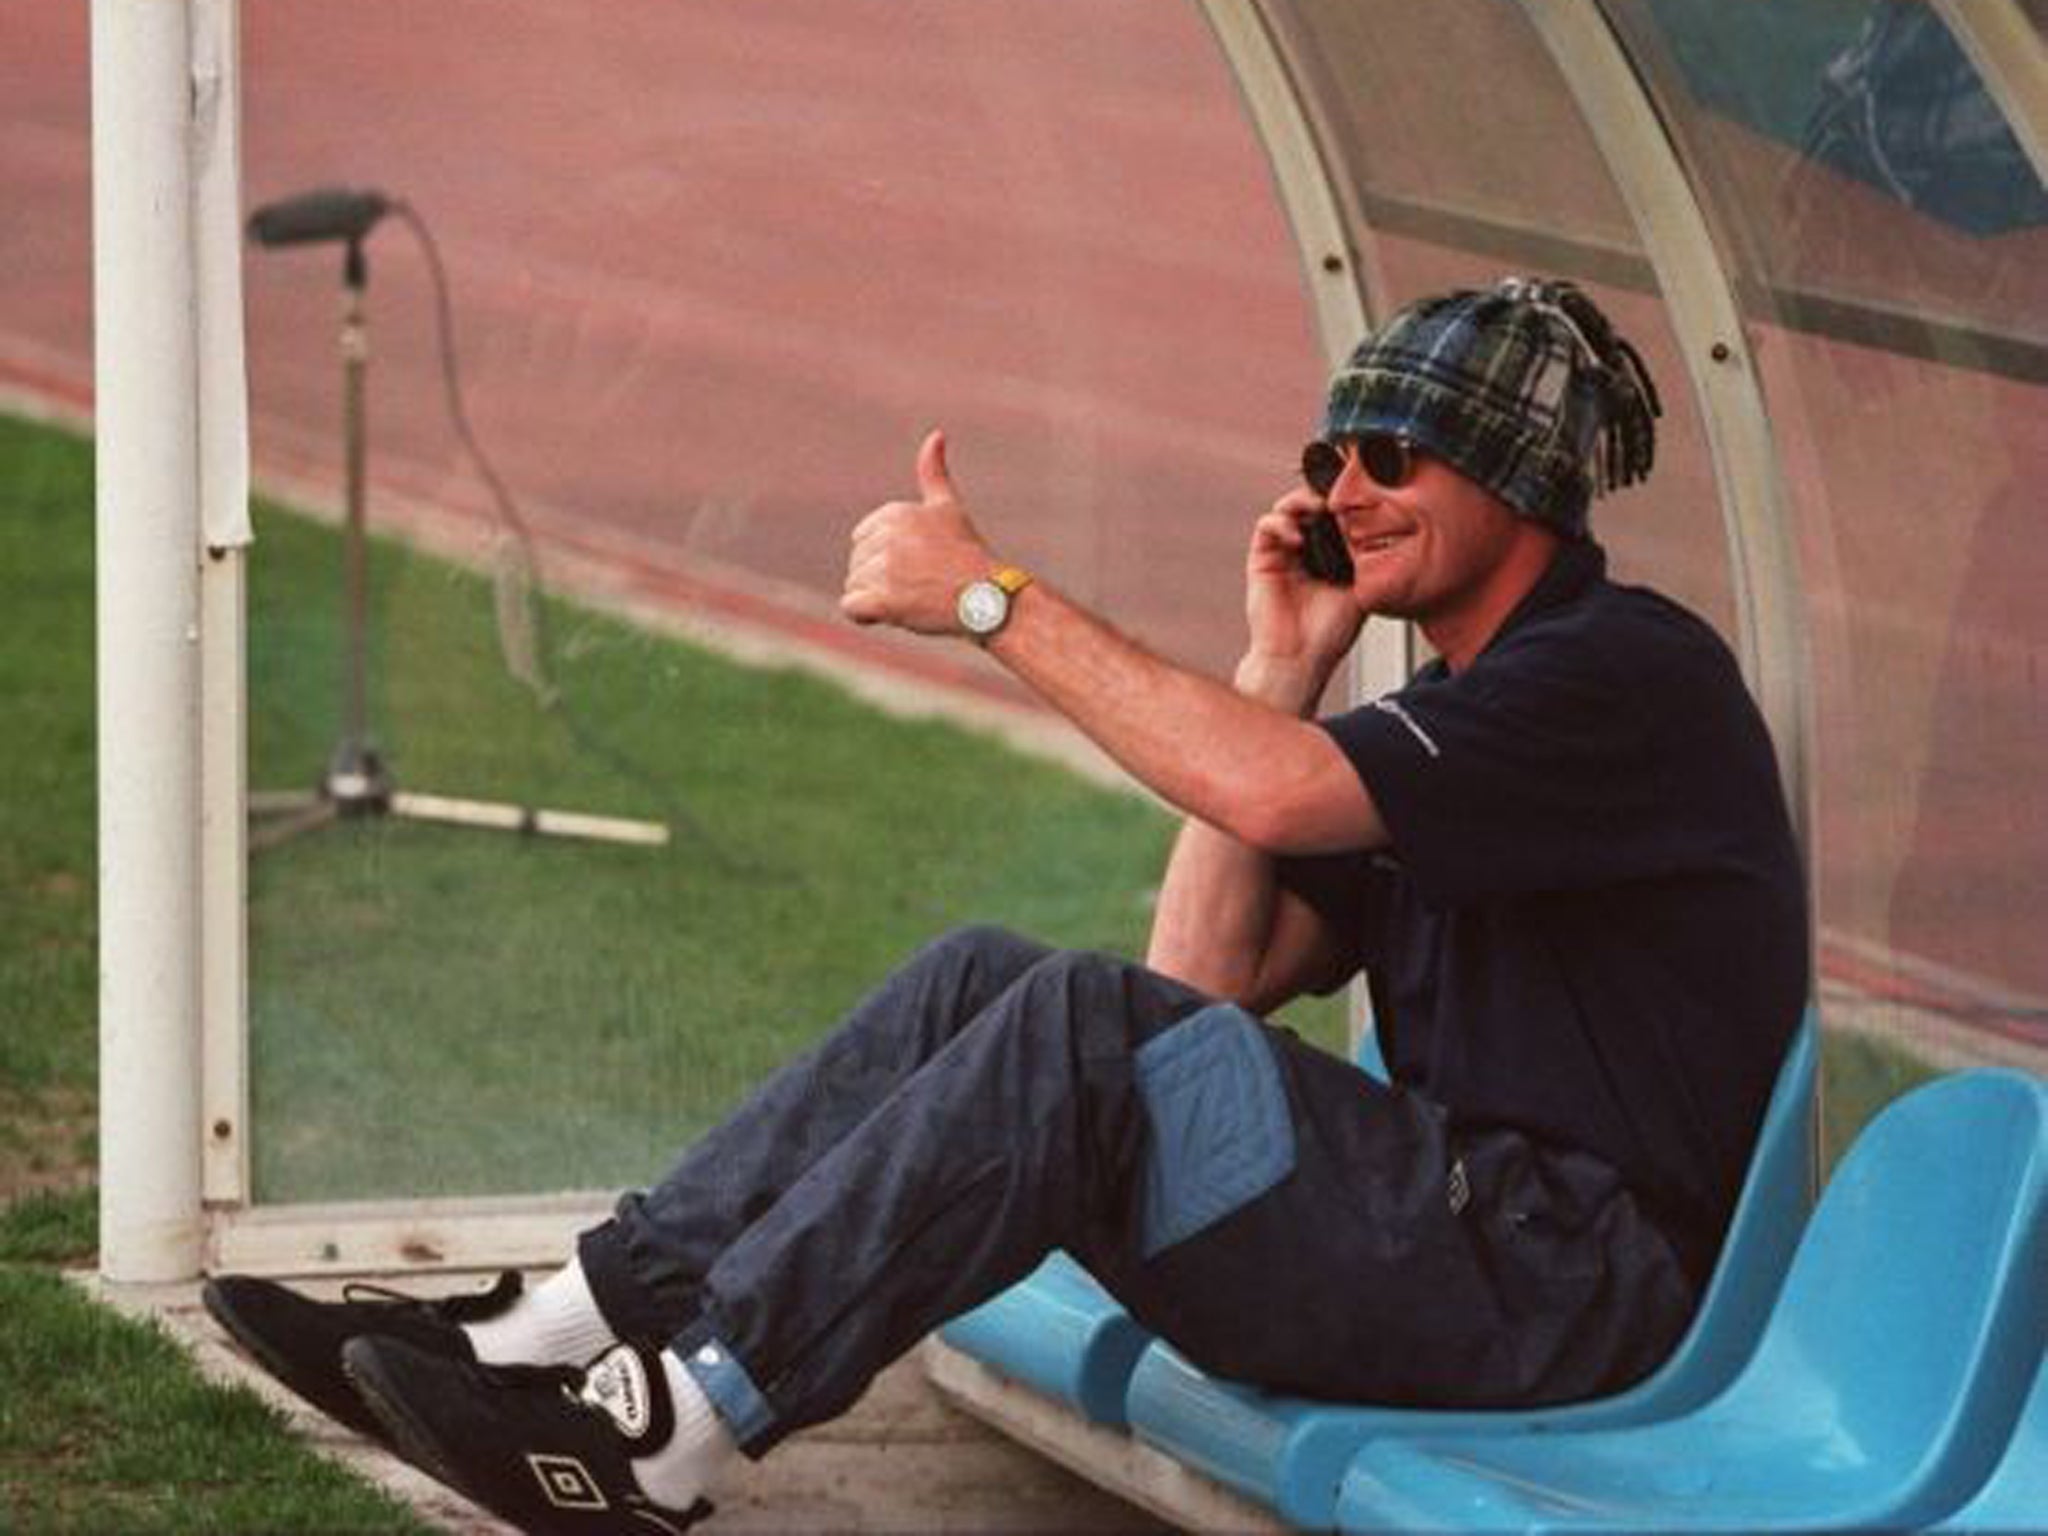 Gazza tries to stay undercover while with Lazio in 1995